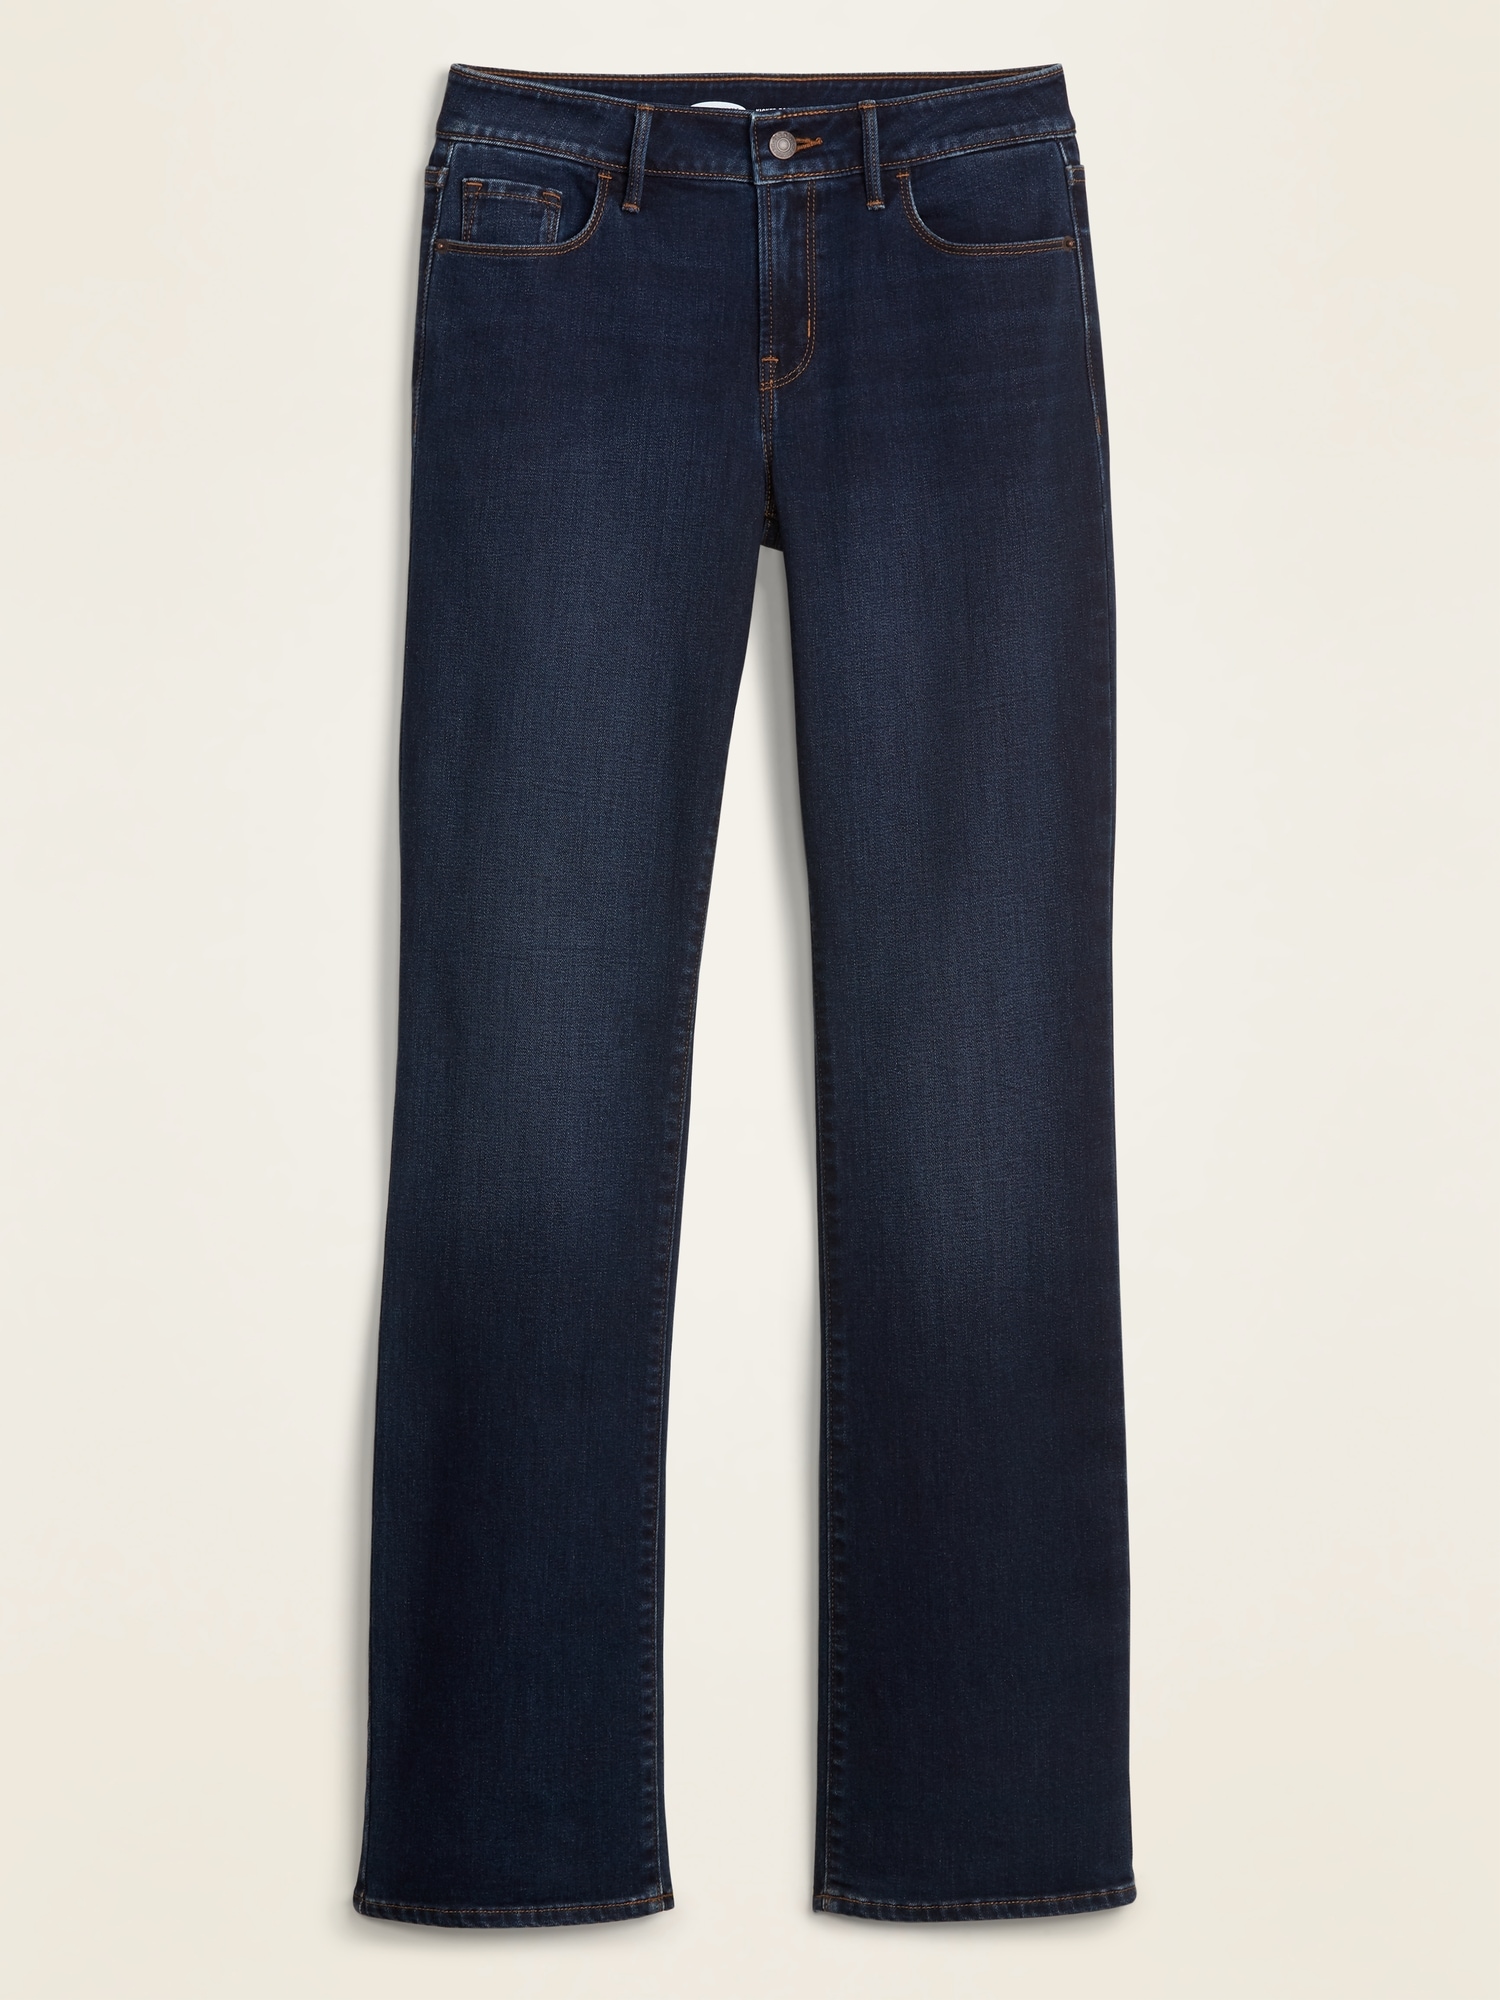 women's old navy boot cut jeans